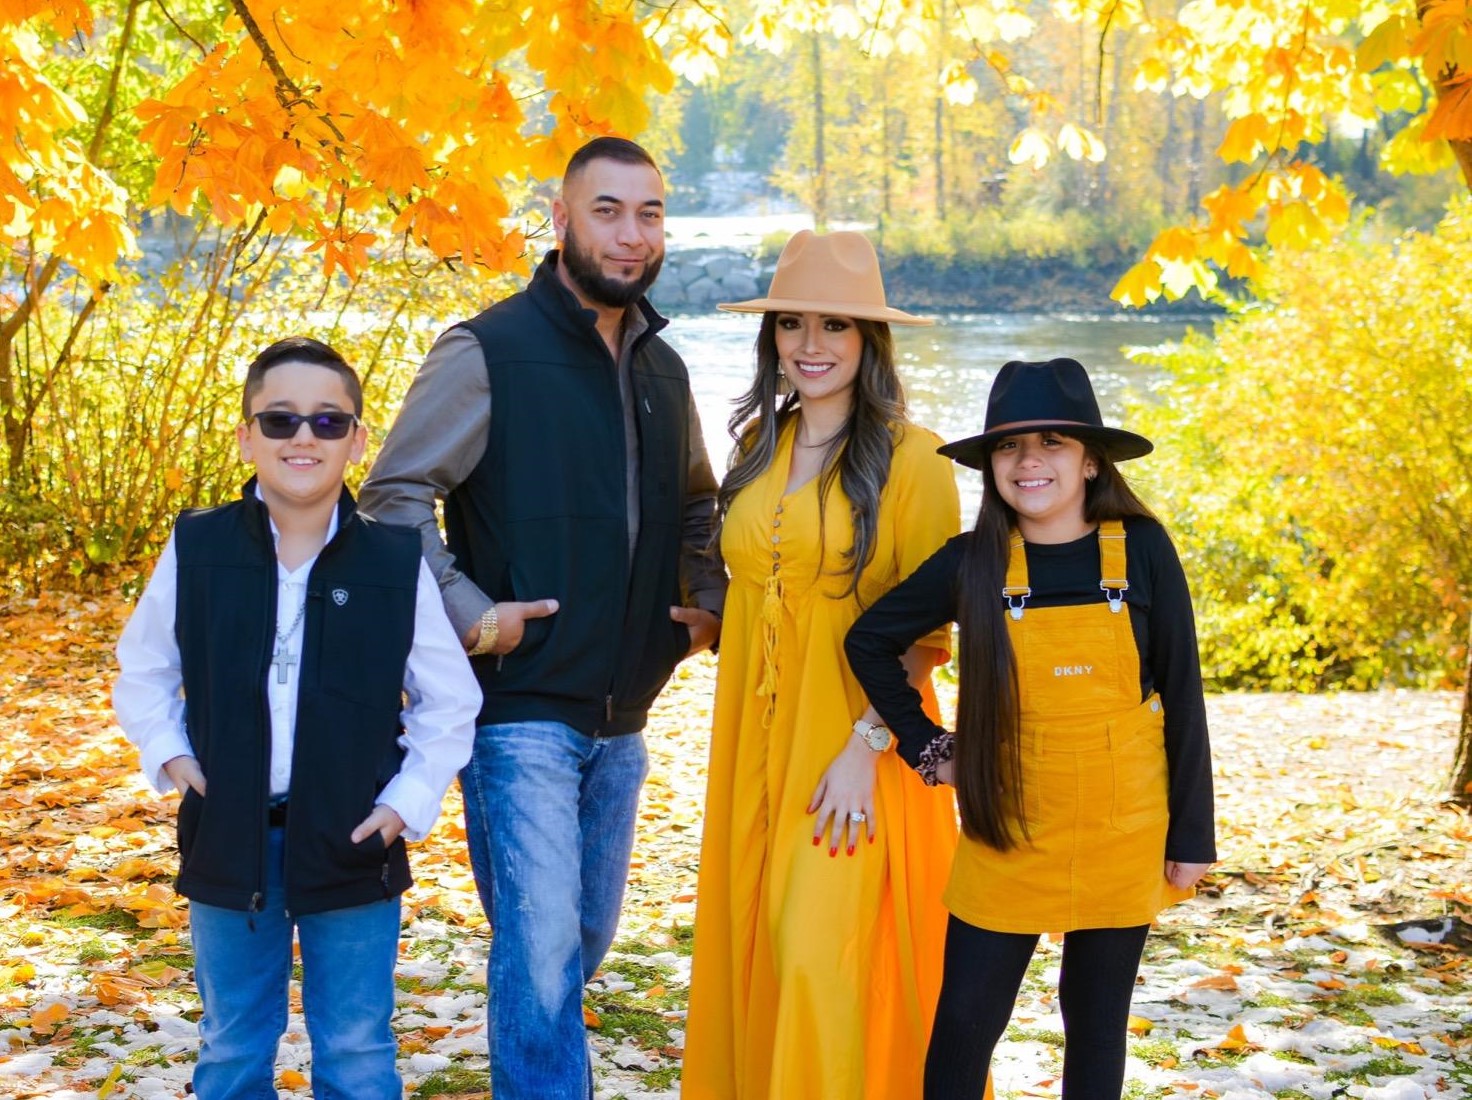 unique fall family photo outfits yellow and black